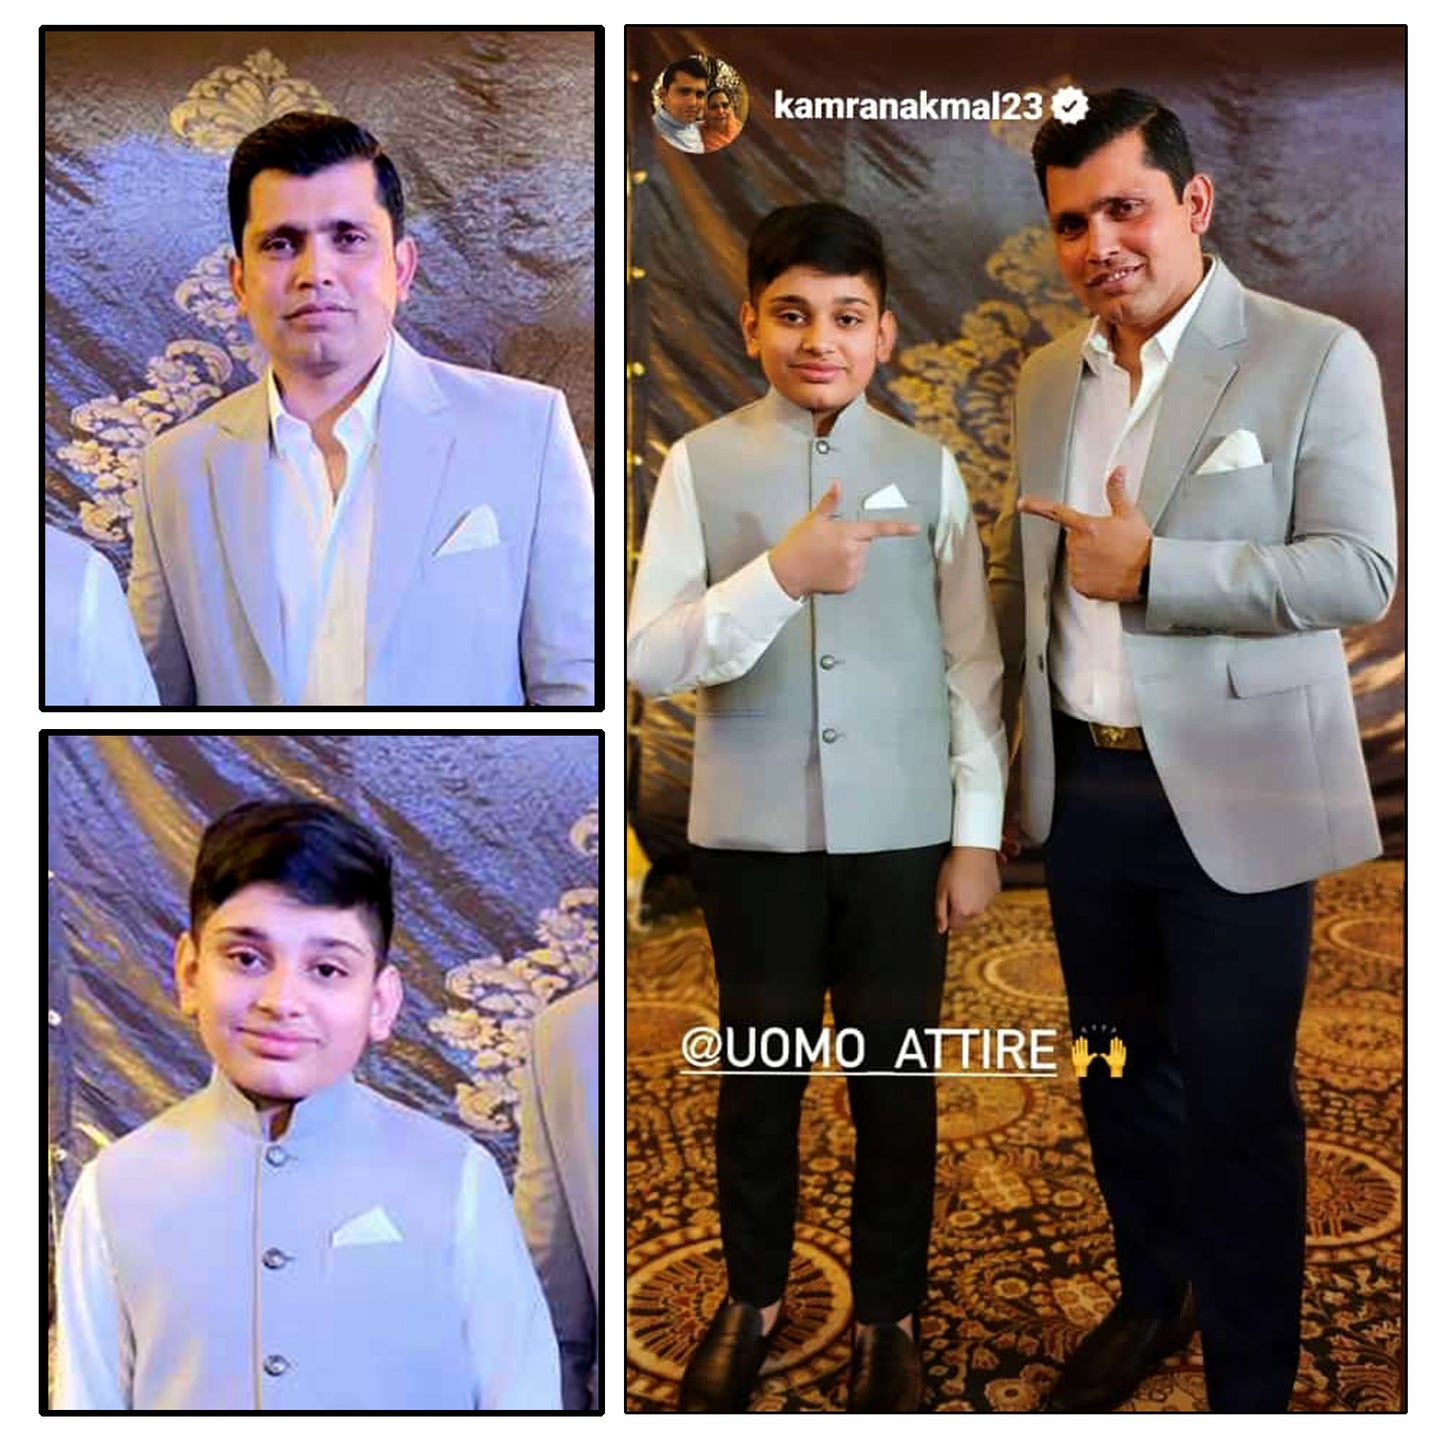 Kamran Akmal and Ayaan Akmal in customized suits designed by UomoAttire